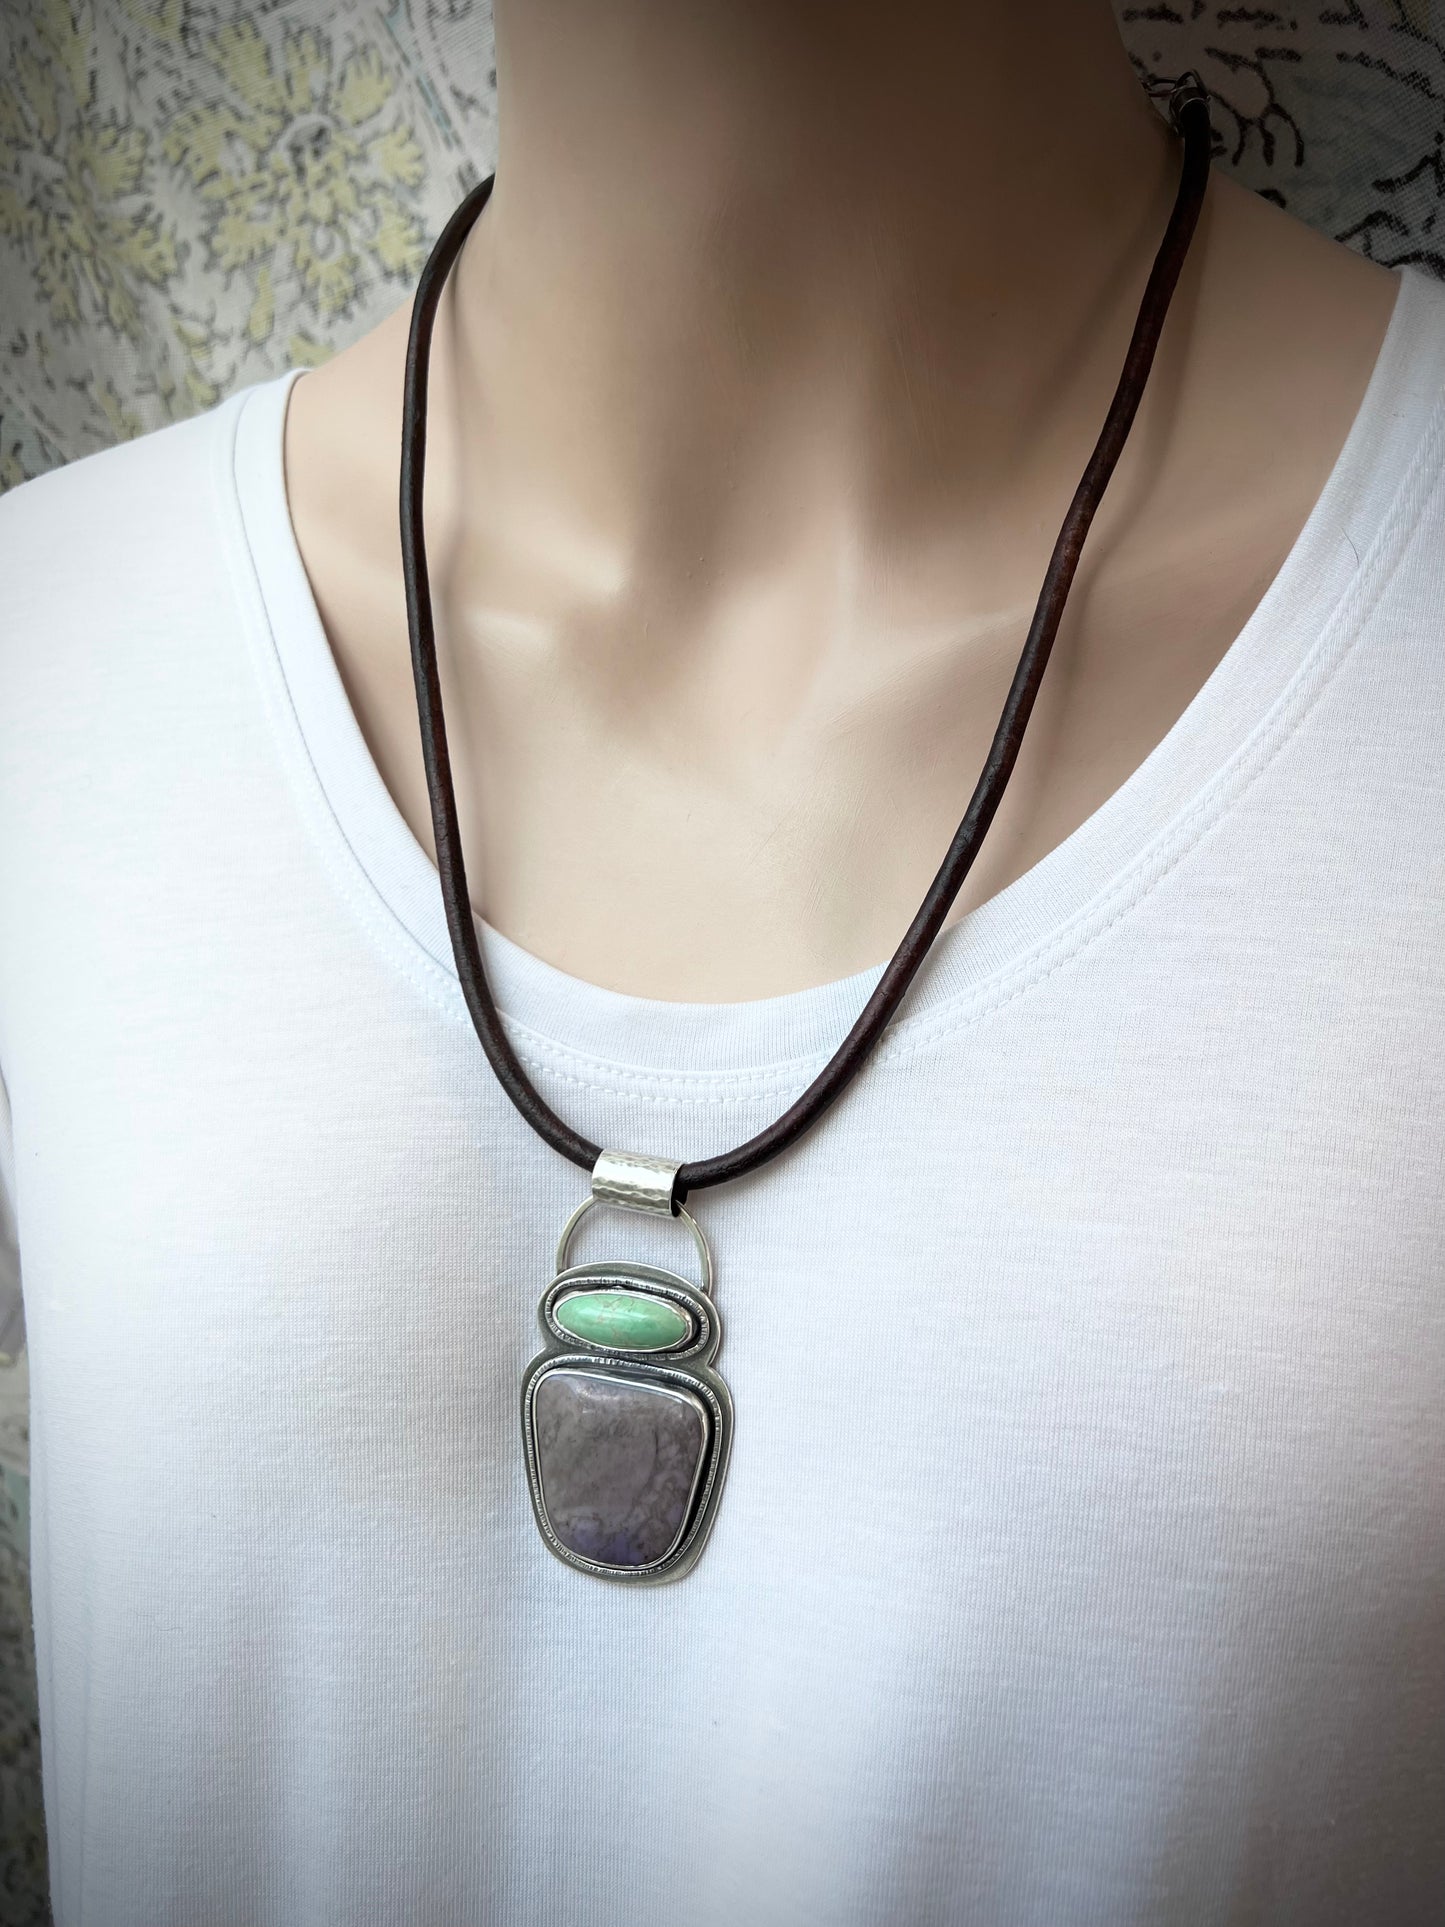 Variscite and Jade Sterling Silver Necklace - Handmade One-of-a-kind Pendant on Genuine Leather